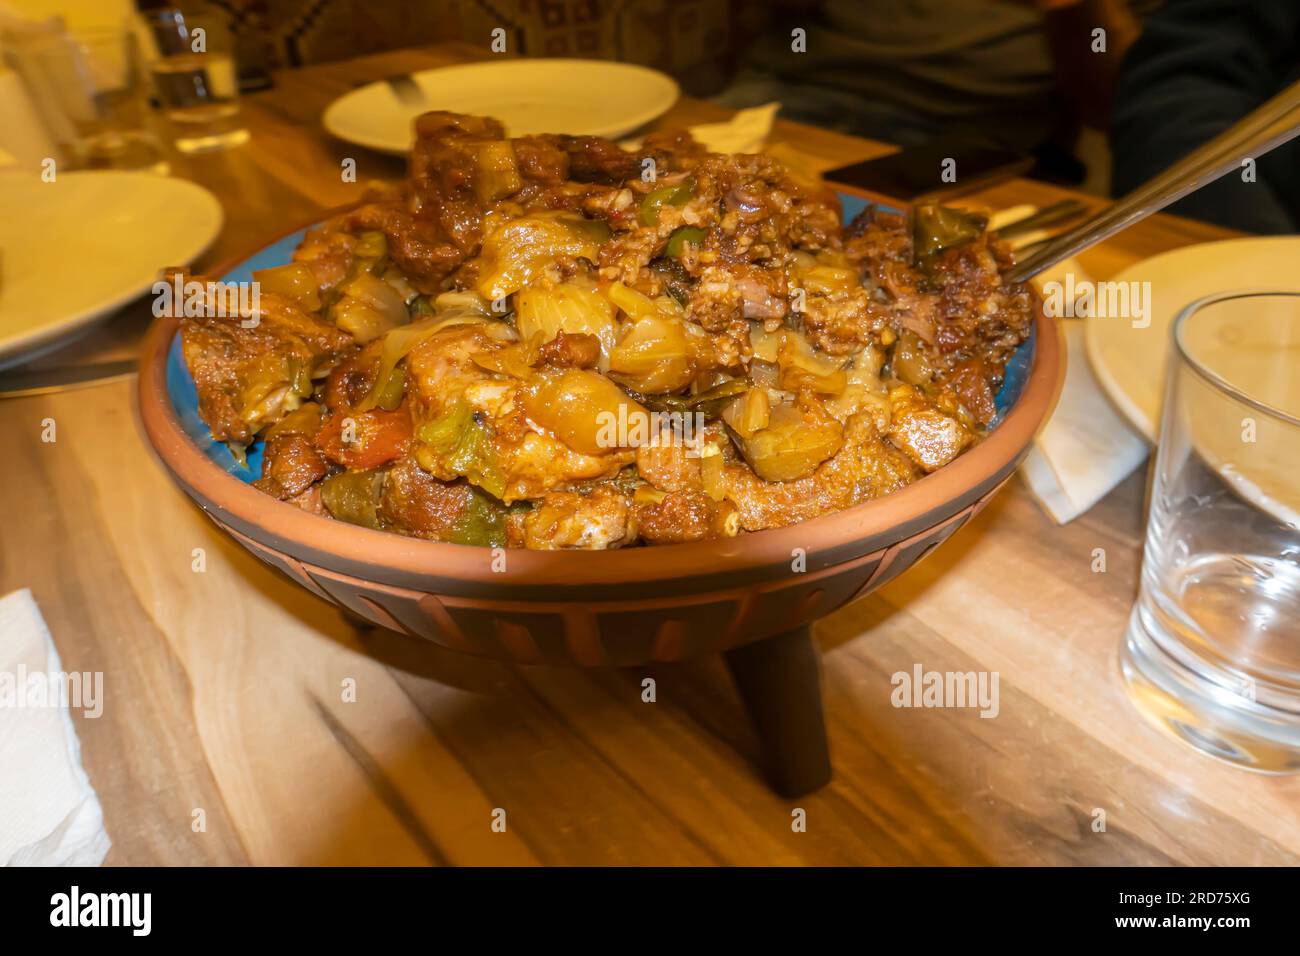 Testi Kebab, Pottery Kebab Anatolian meal, prepared in a clay pot to preserve the freshness, aroma and flavour Stock Photo